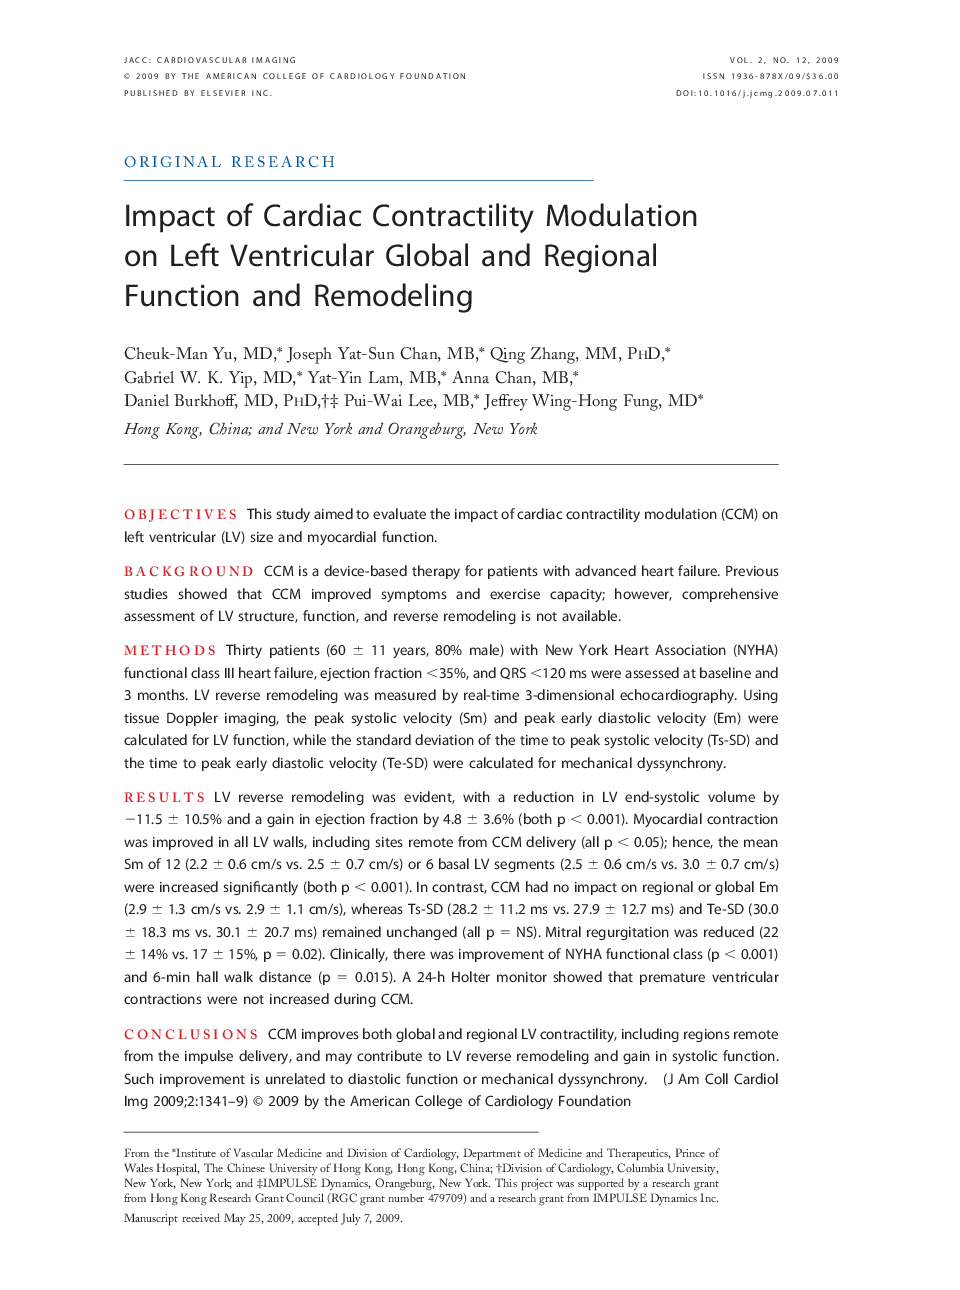 Impact of Cardiac Contractility Modulation on Left Ventricular Global and Regional Function and Remodeling 